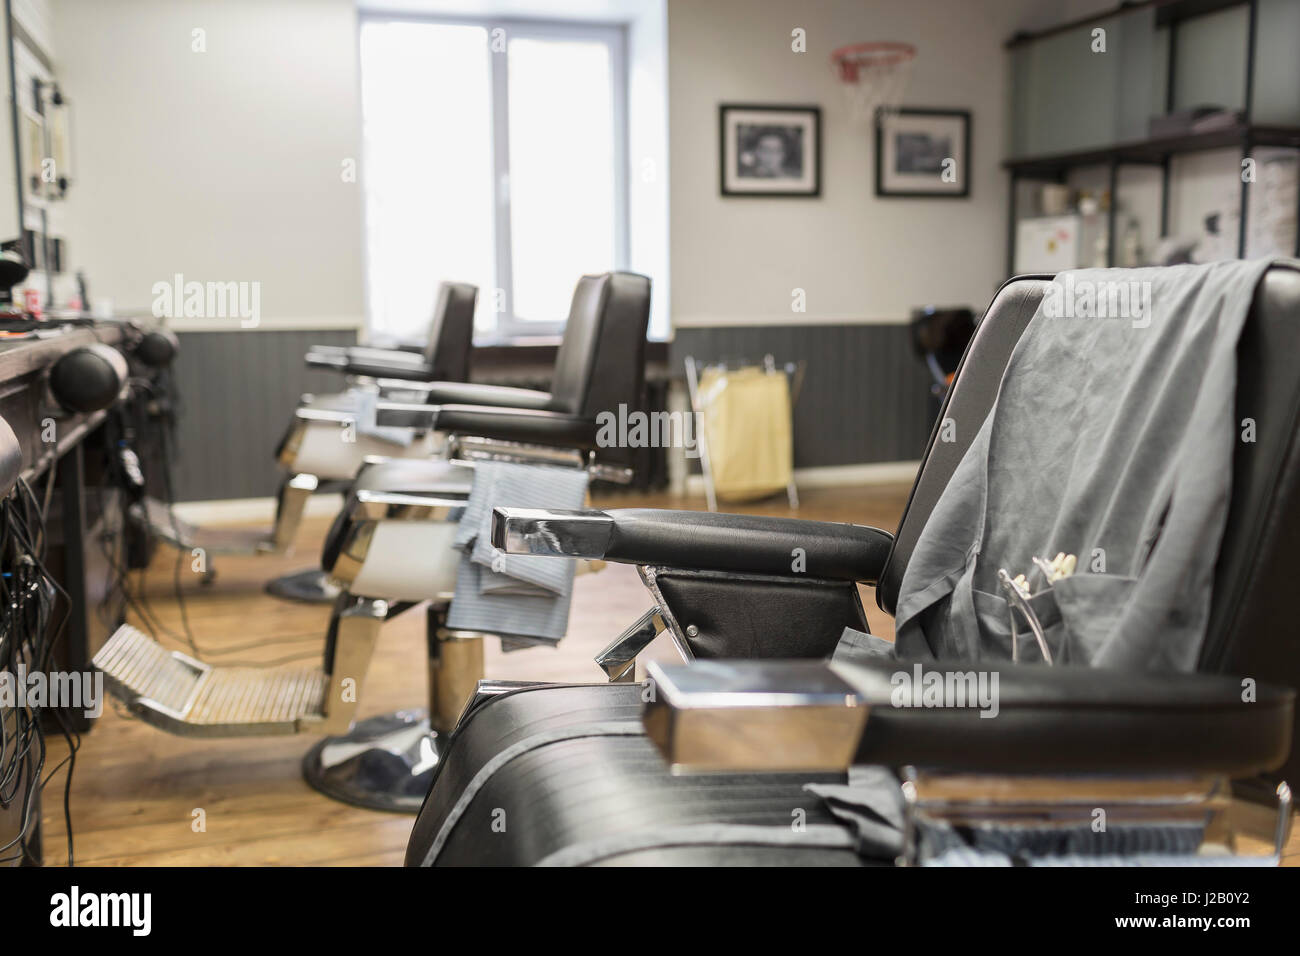 Row of empty chairs at barber shop Stock Photo